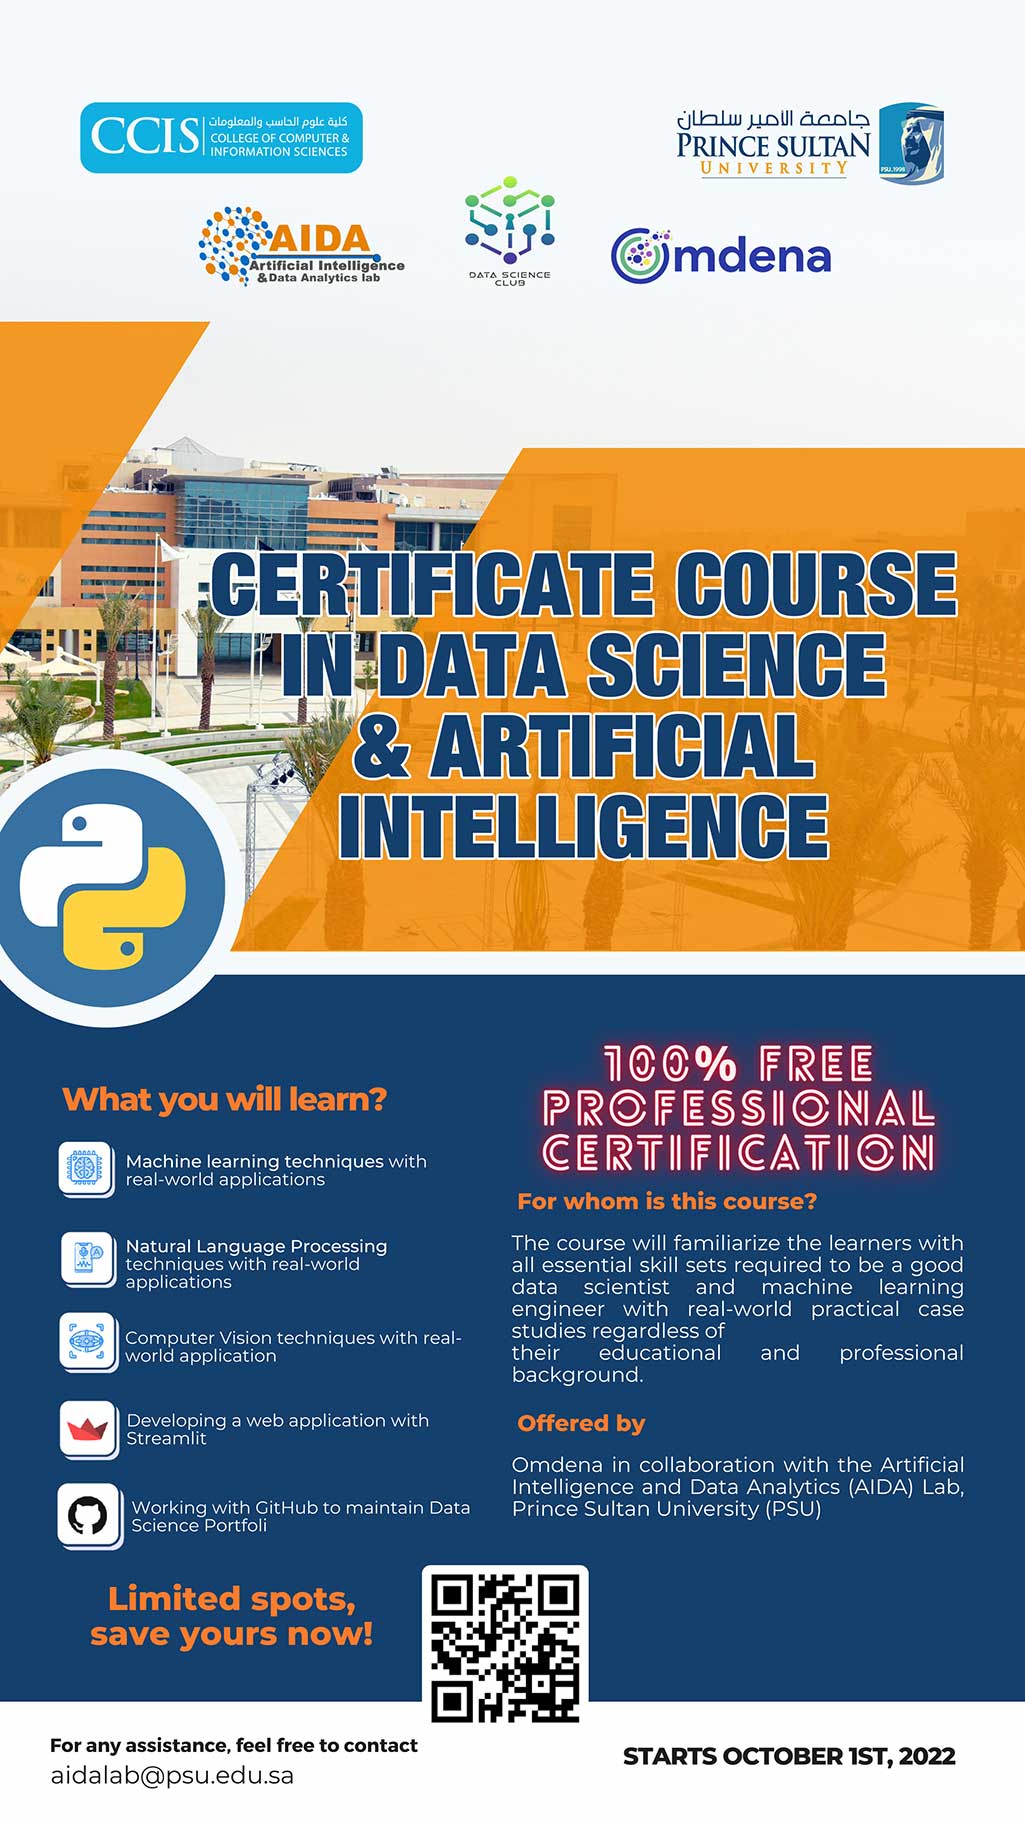 Certificate Course in Data Science & Artificial Intelligence